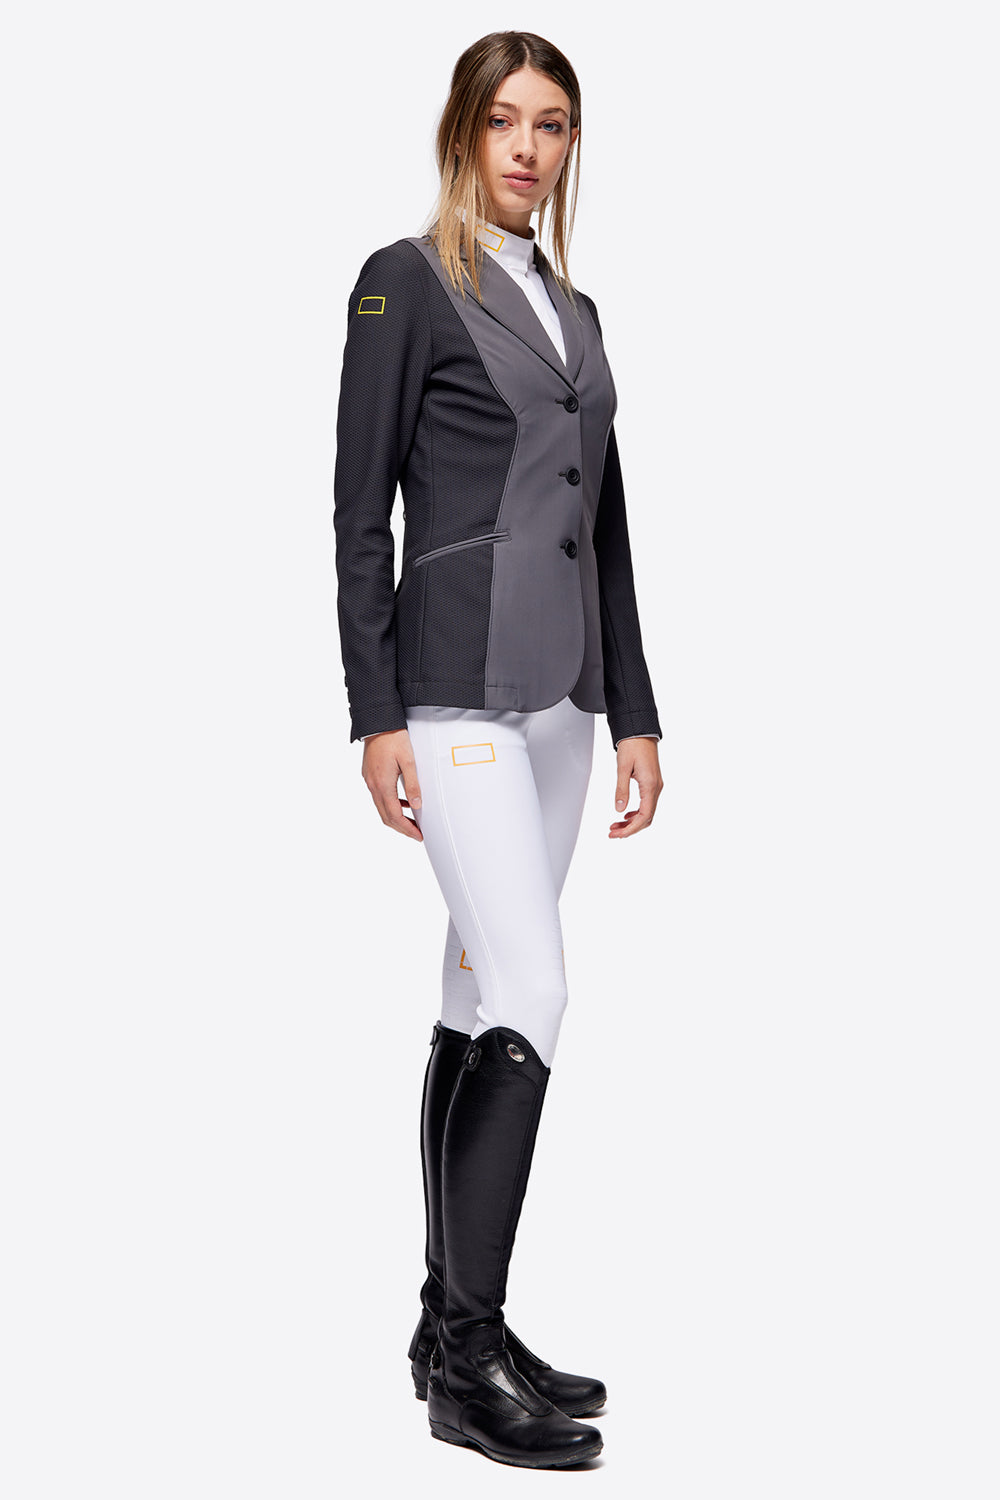 RG Women's Jersey And Mesh Riding Jacket